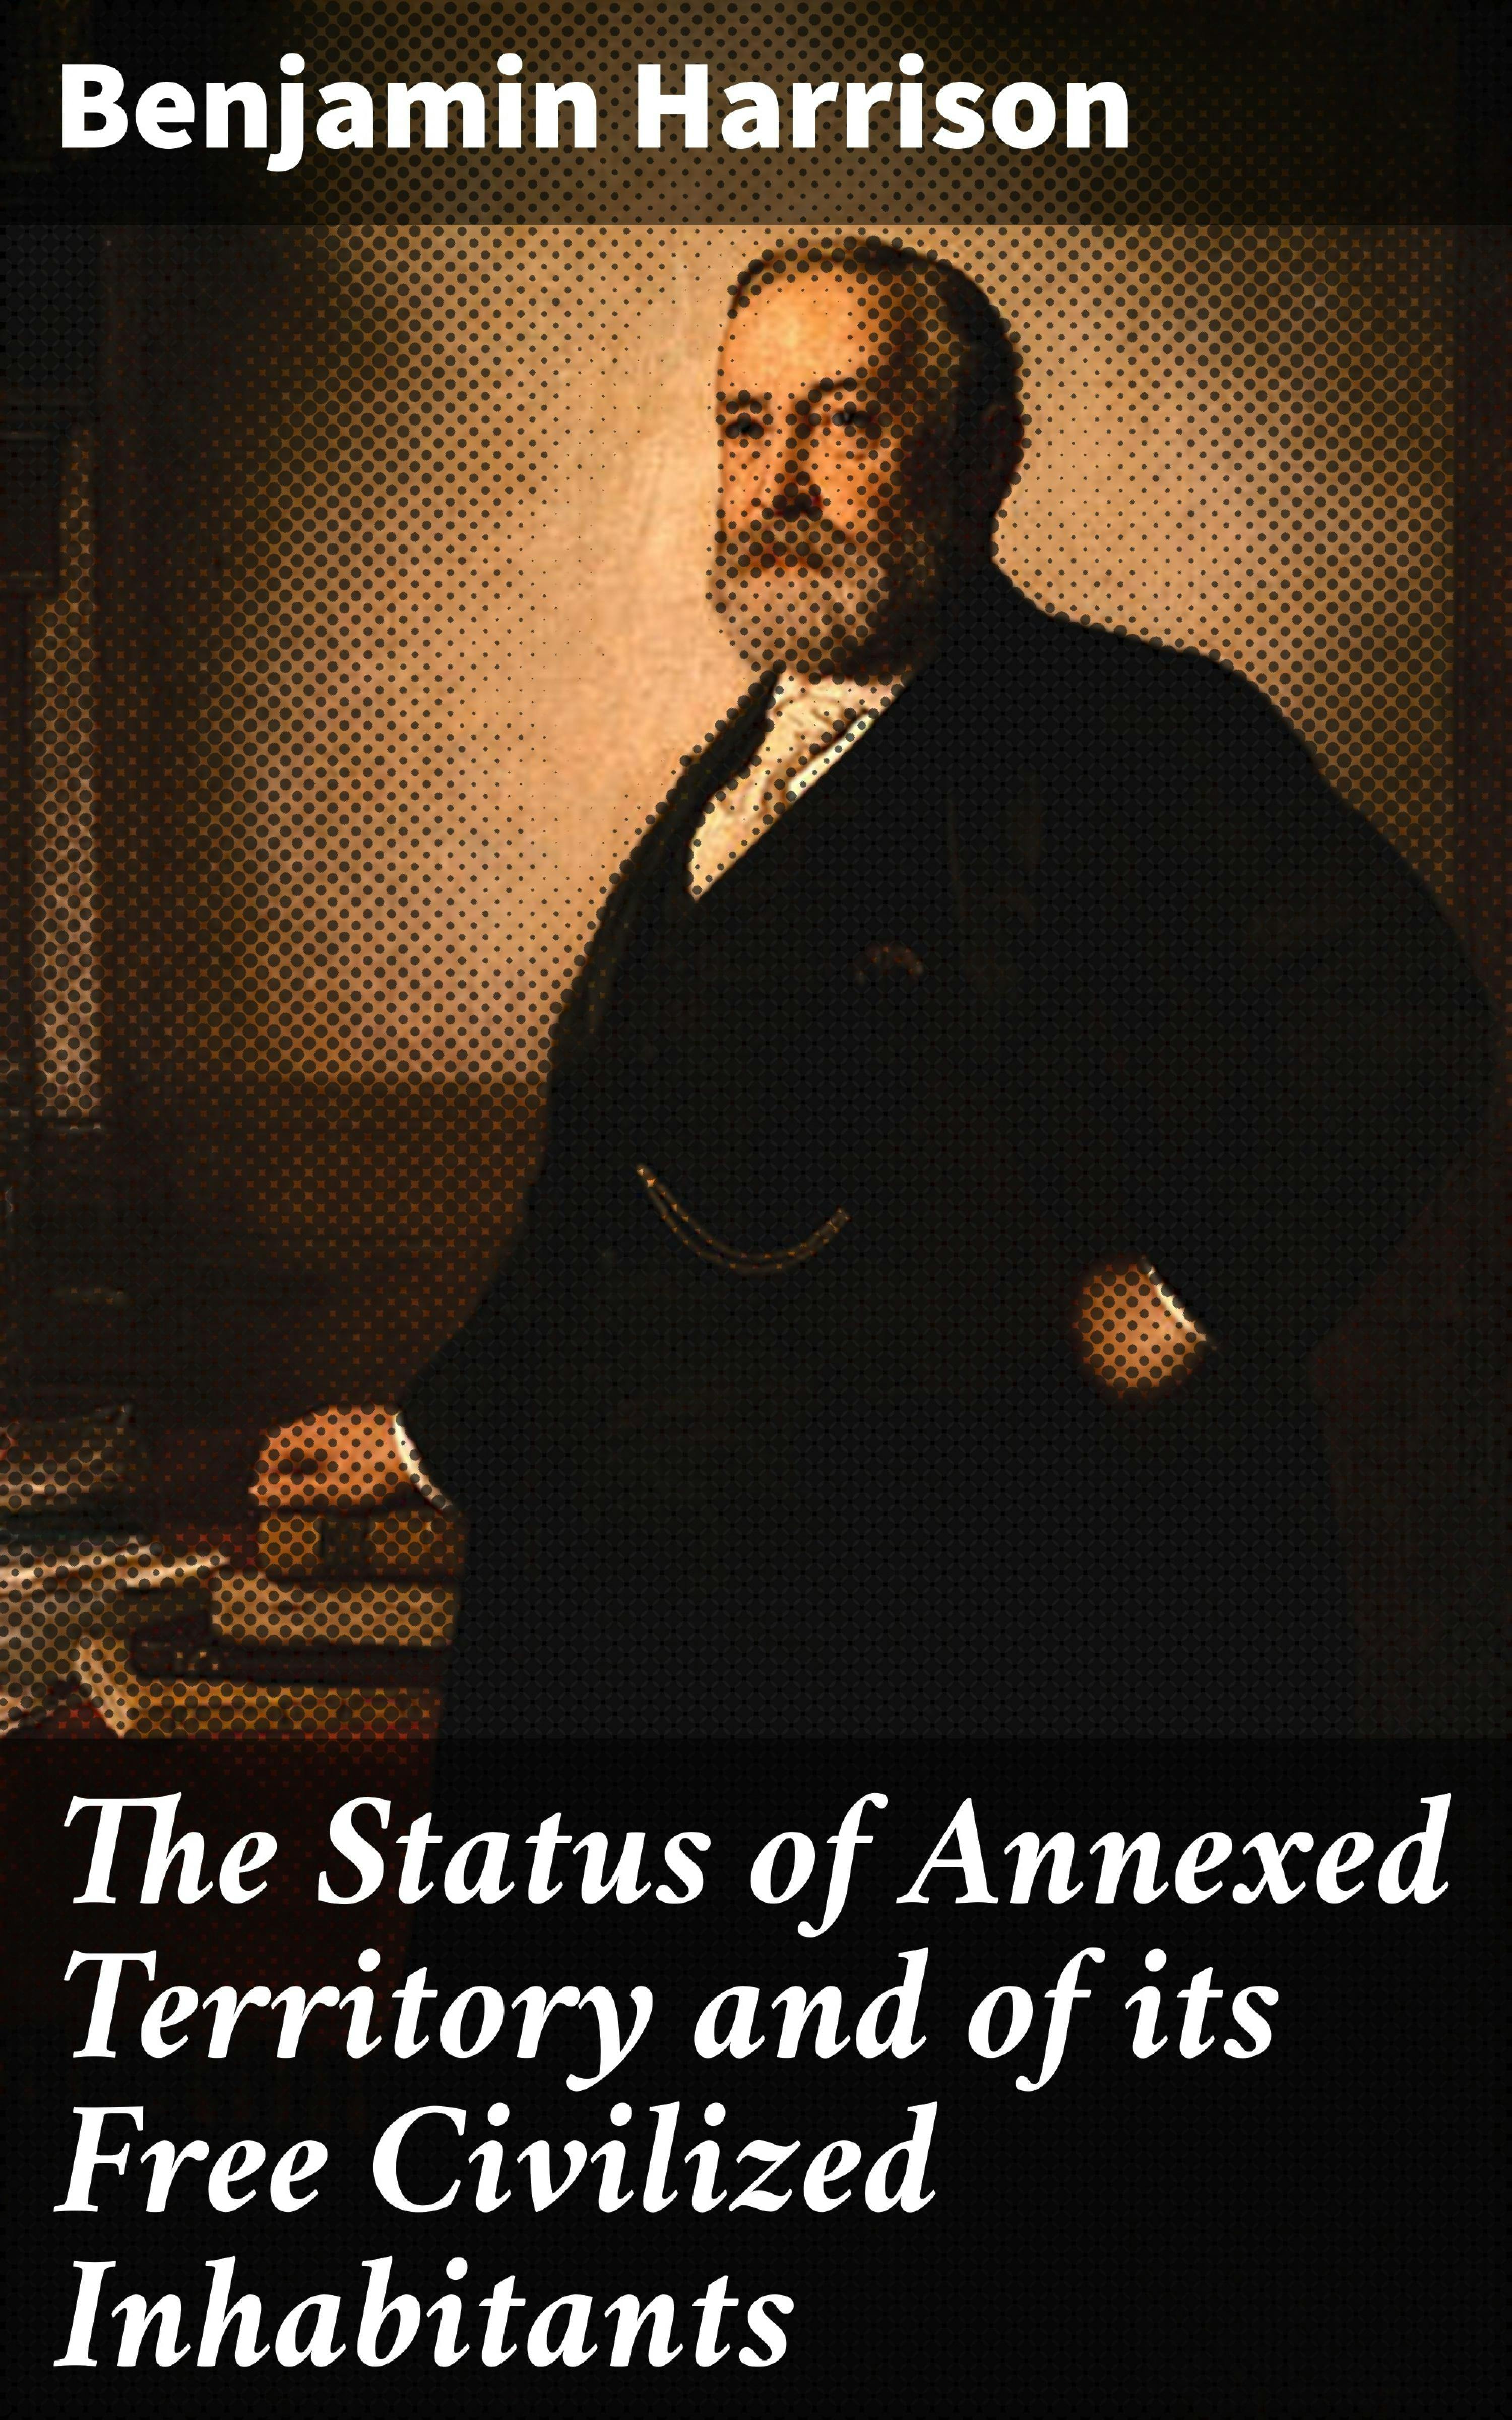 The Status of Annexed Territory and of its Free Civilized Inhabitants - Benjamin Harrison